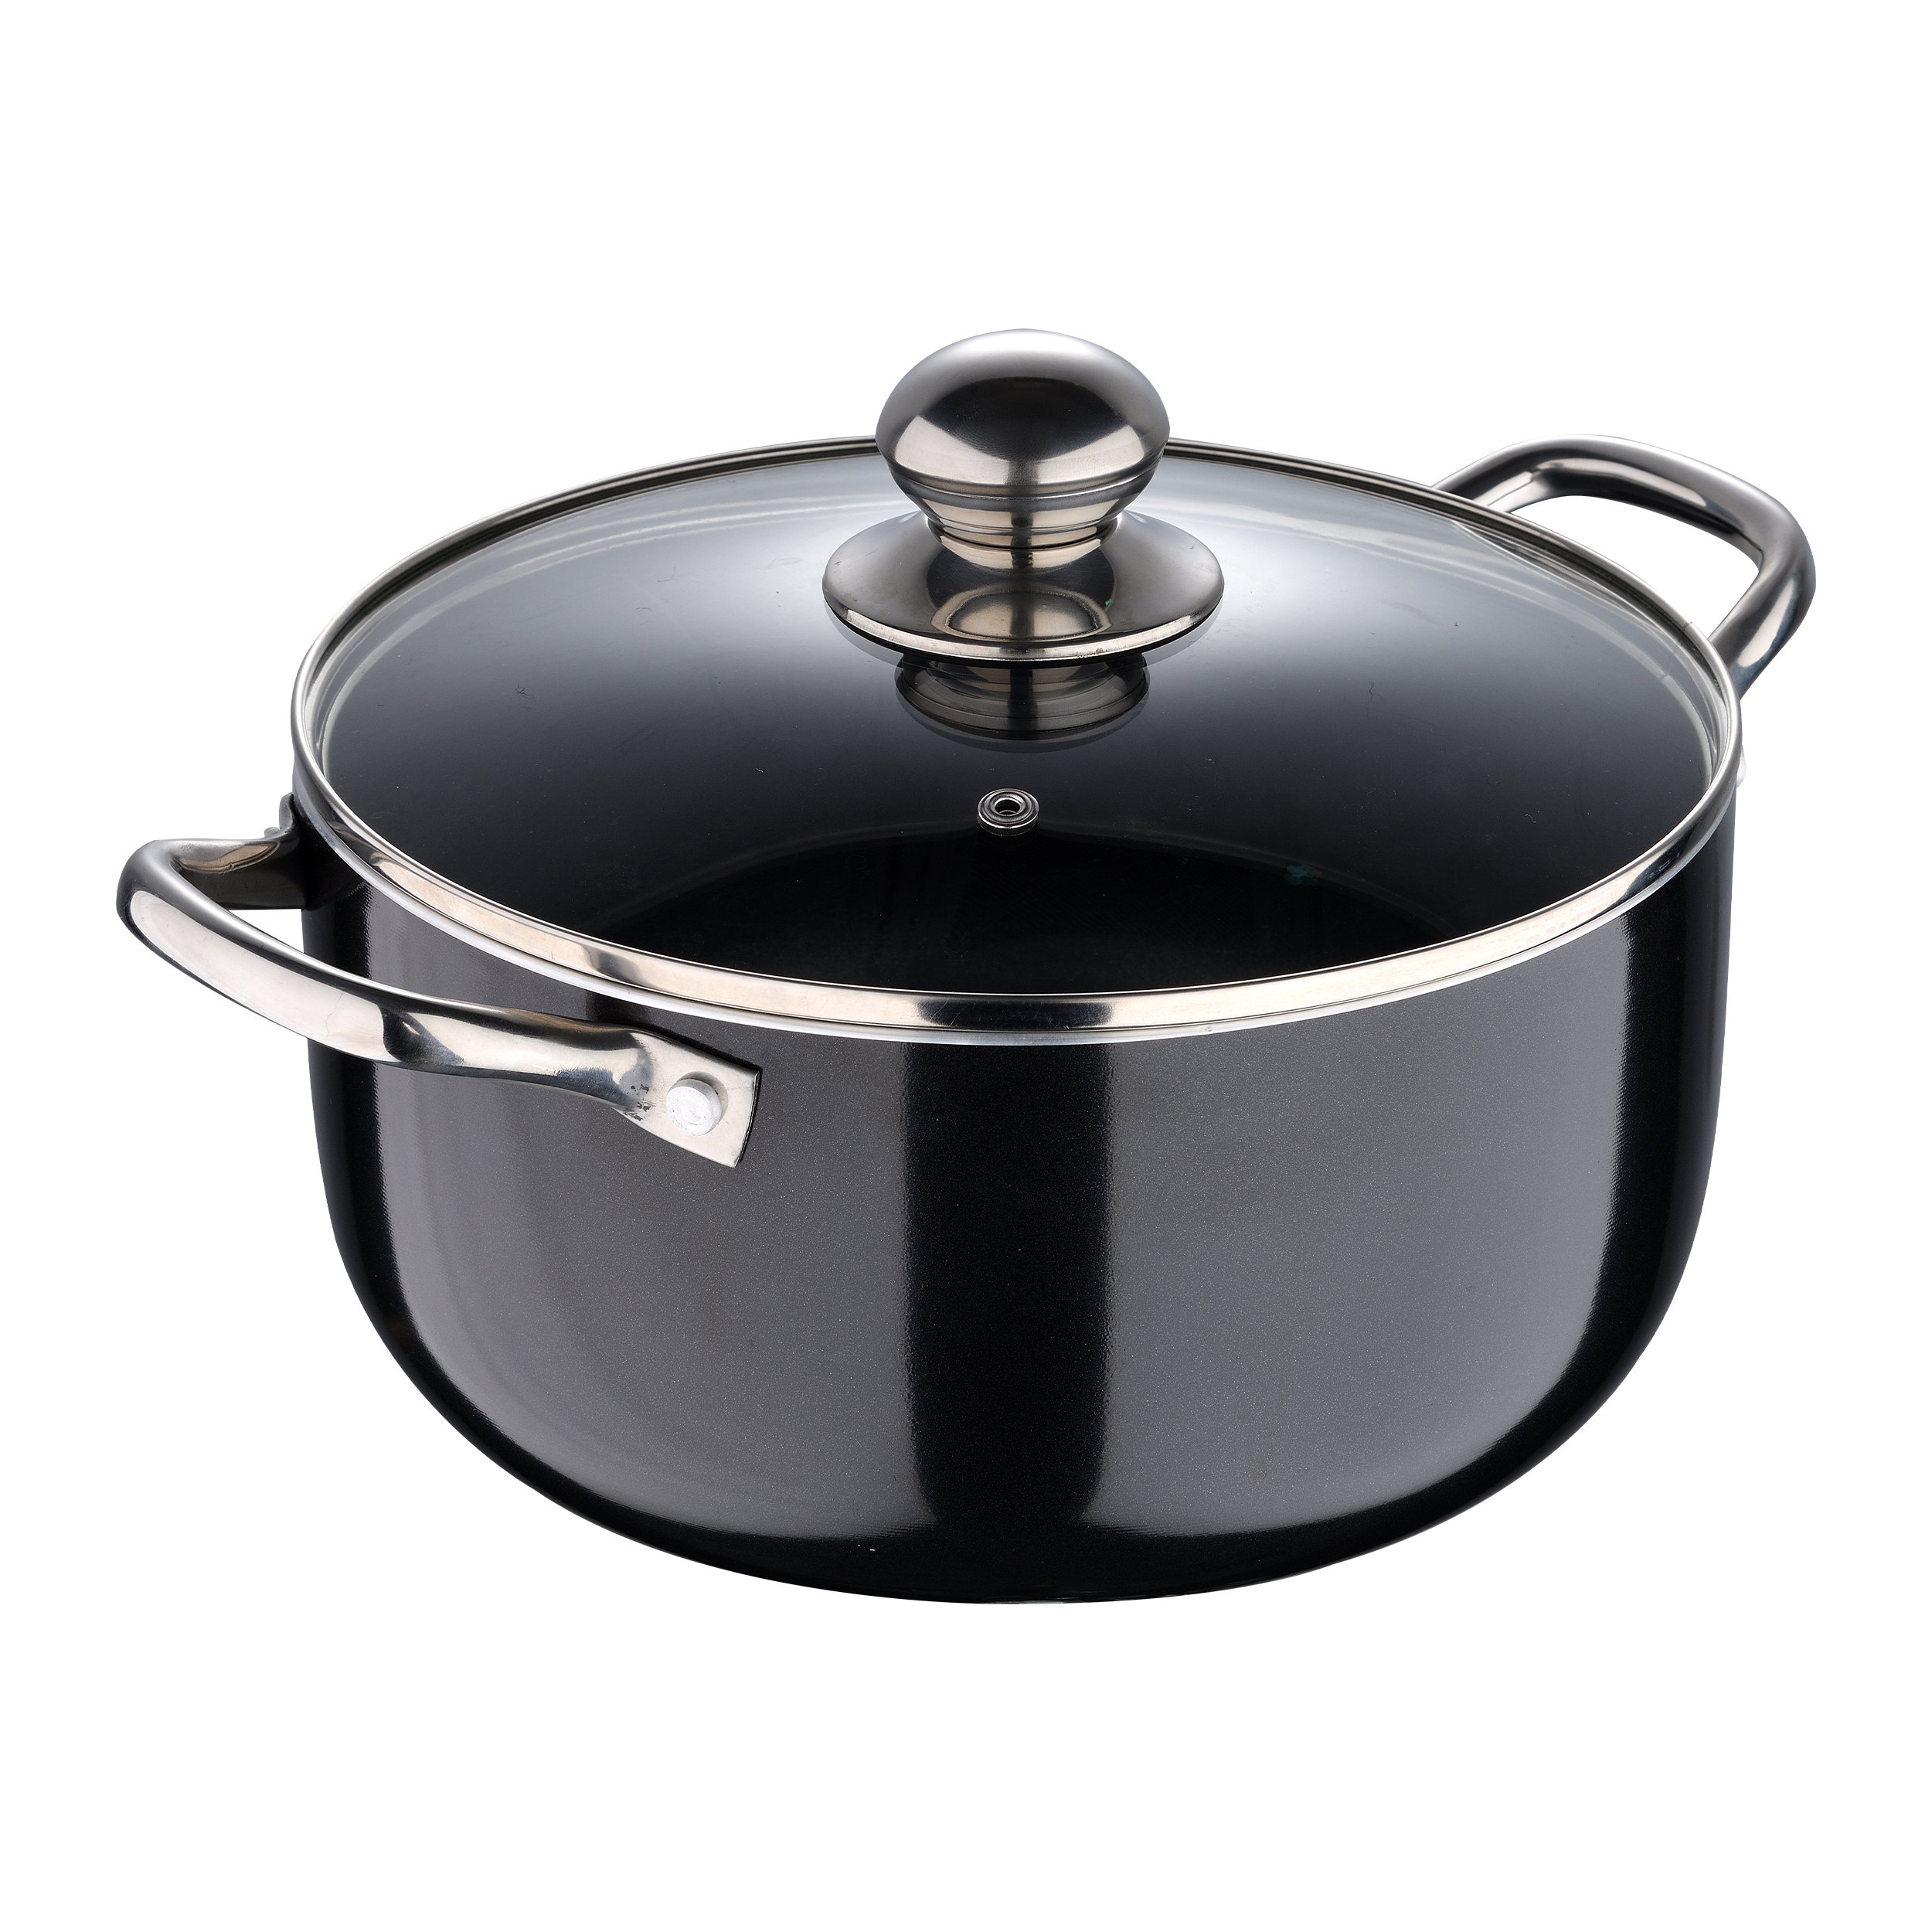 Gourmet by Bergner - 8 qt Stainless Steel Dutch Oven with Vented